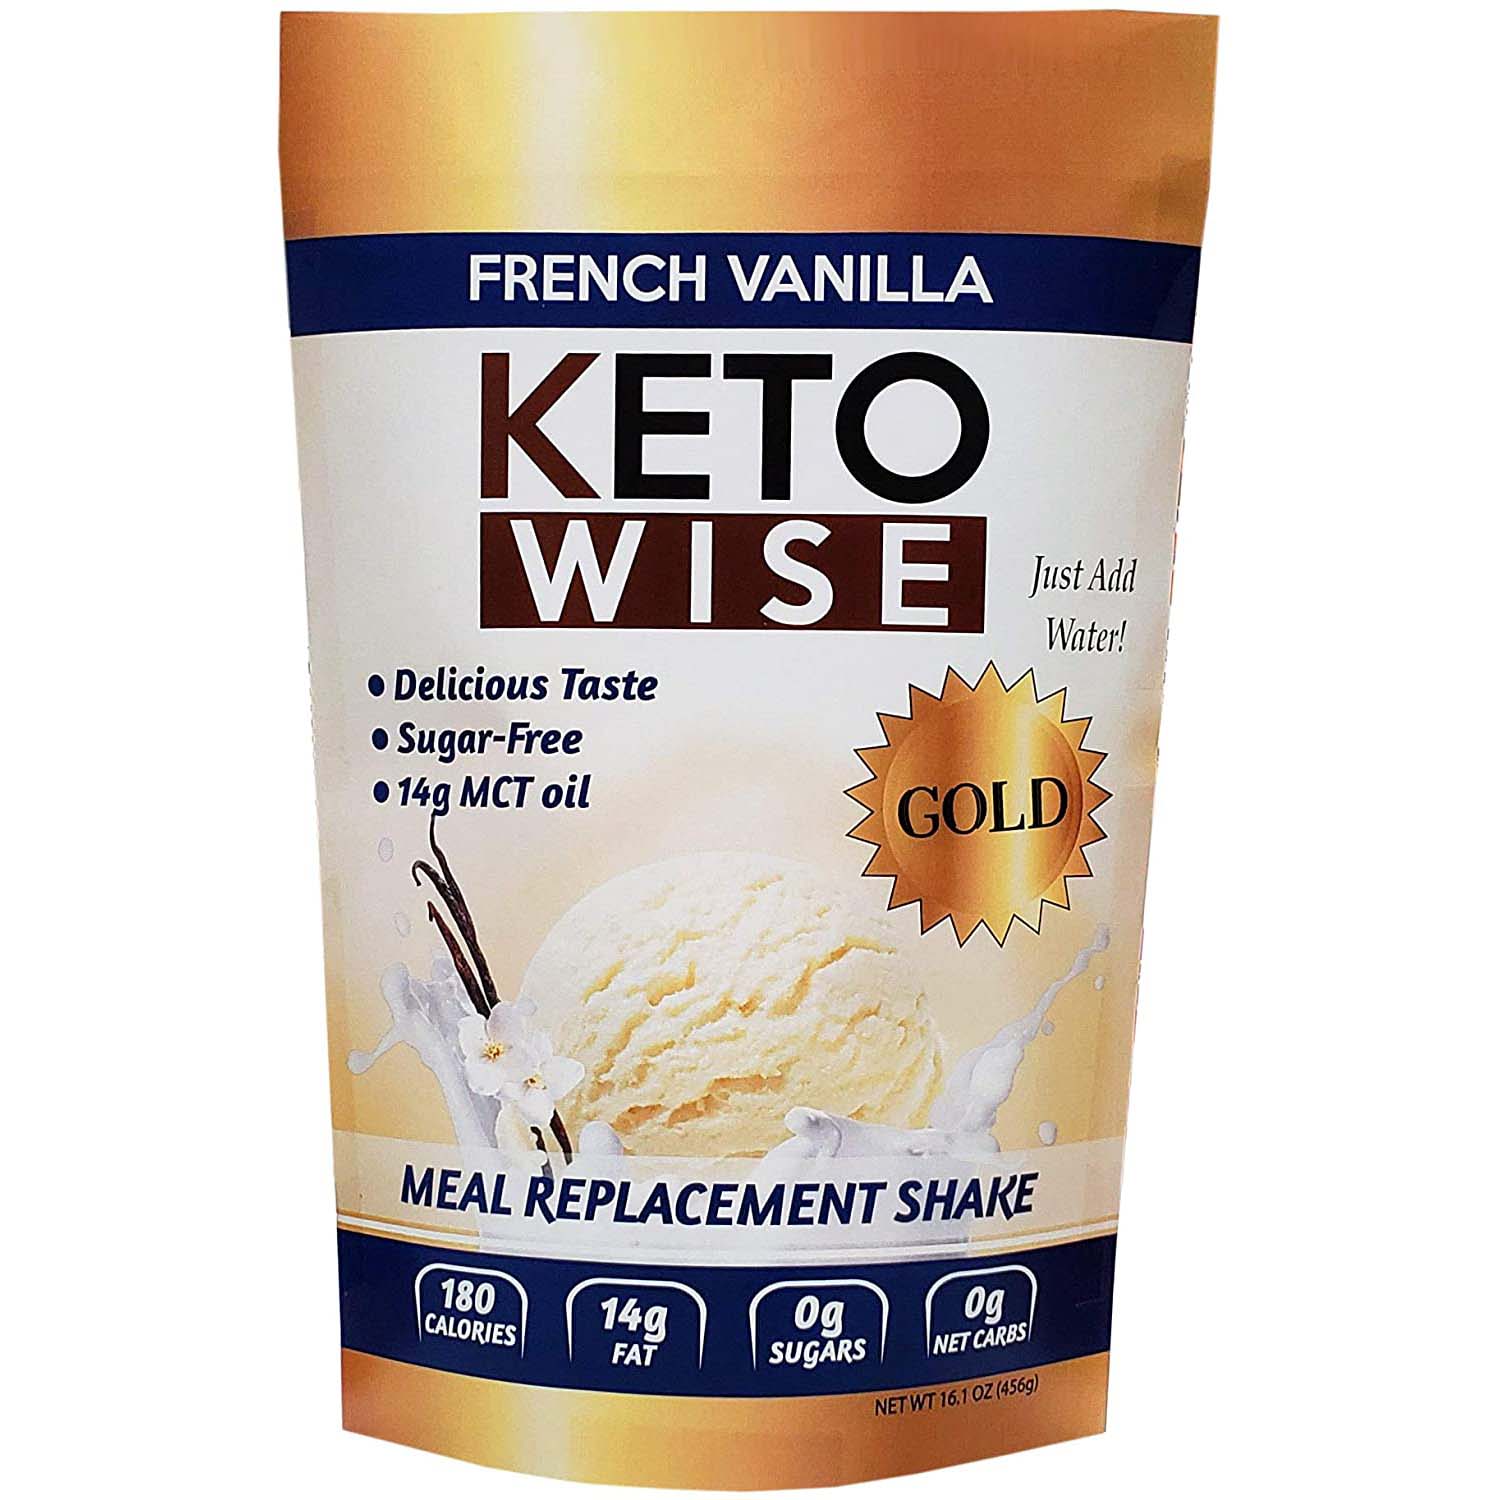 Keto Wise Meal Replacement Shake, French Vanilla, 456 Gm